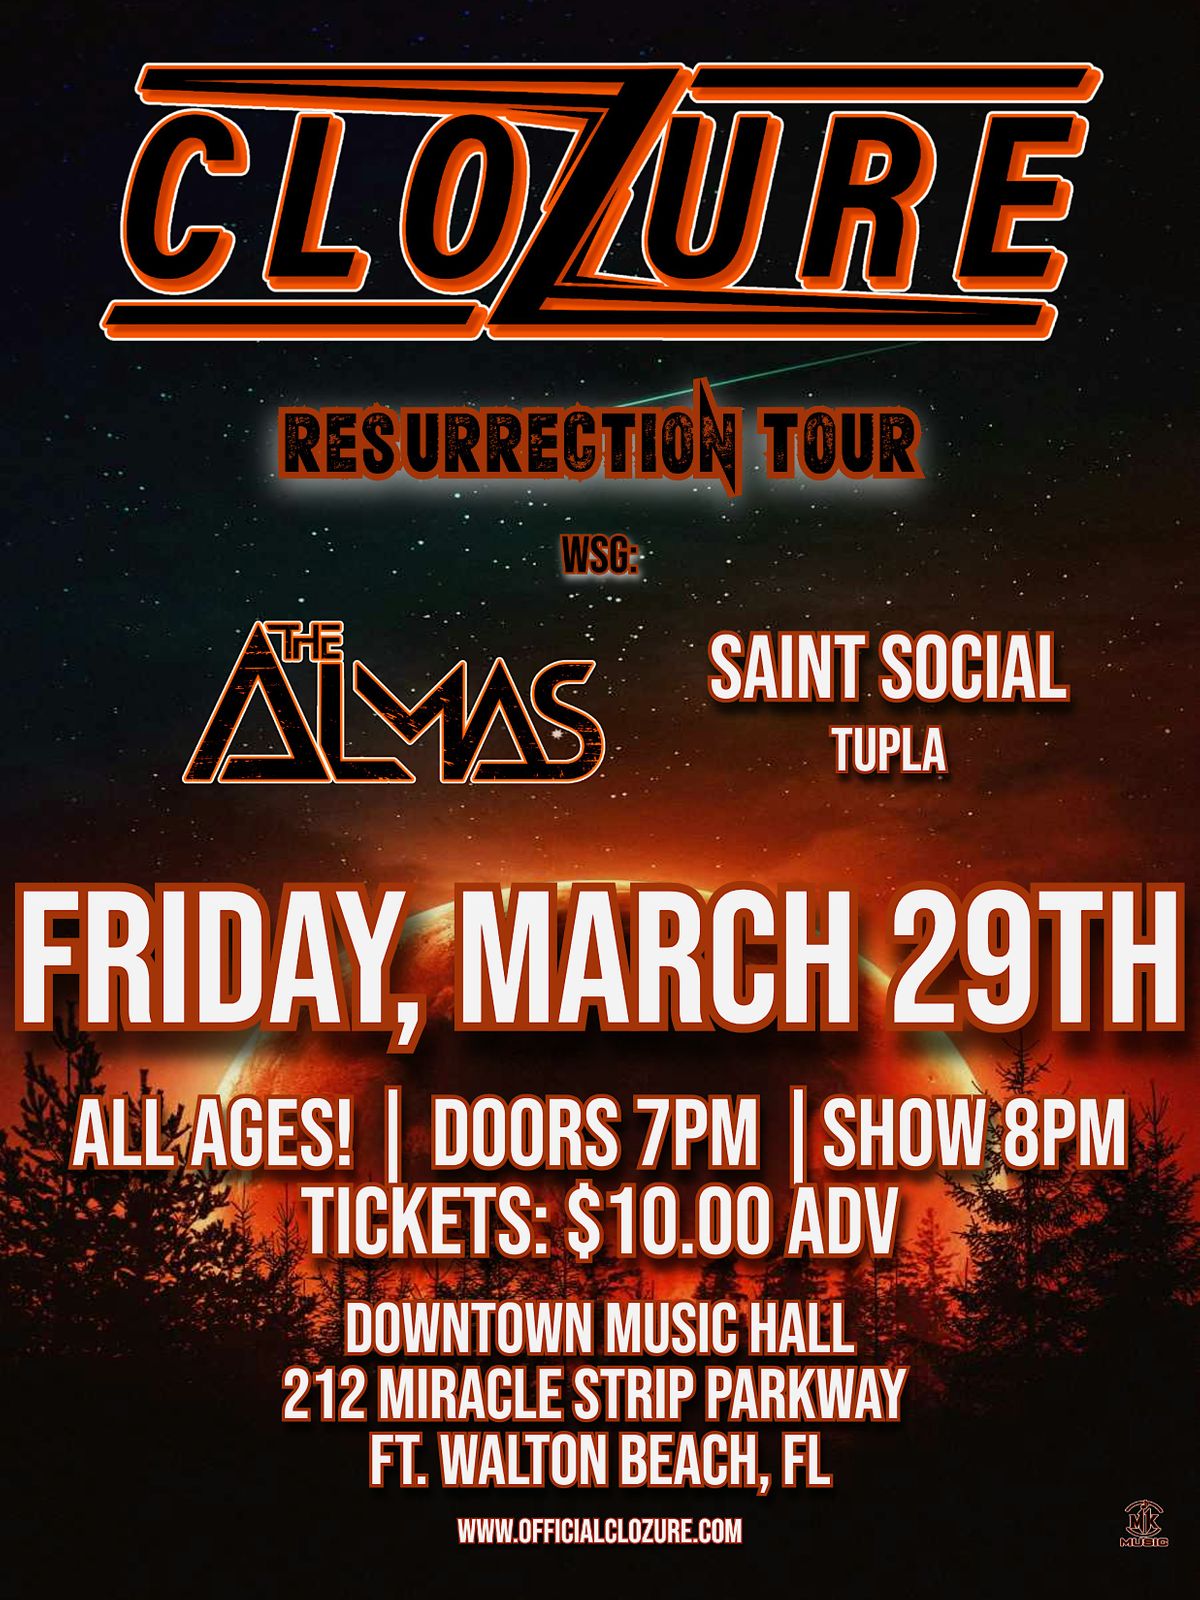 Clozure and the Almas live at Downtown Music Hall